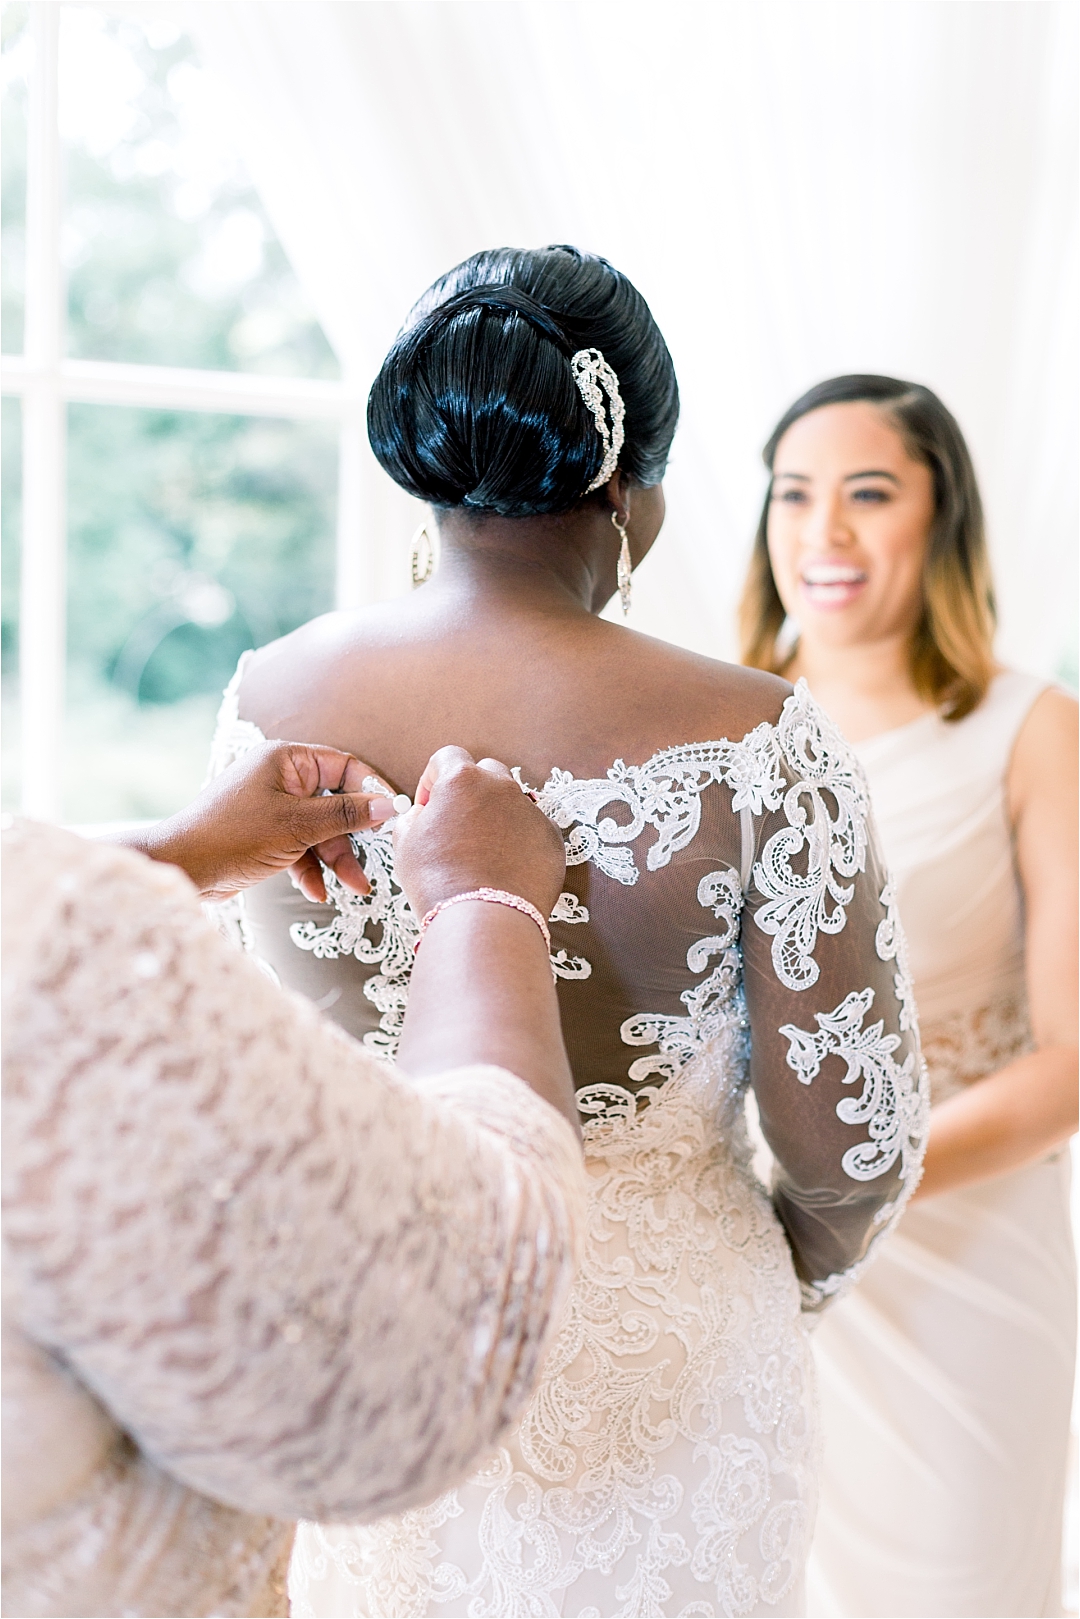 back of wedding dress lace detail_Photos by Leigh Wolfe, Atlanta's Top Wedding Photographer